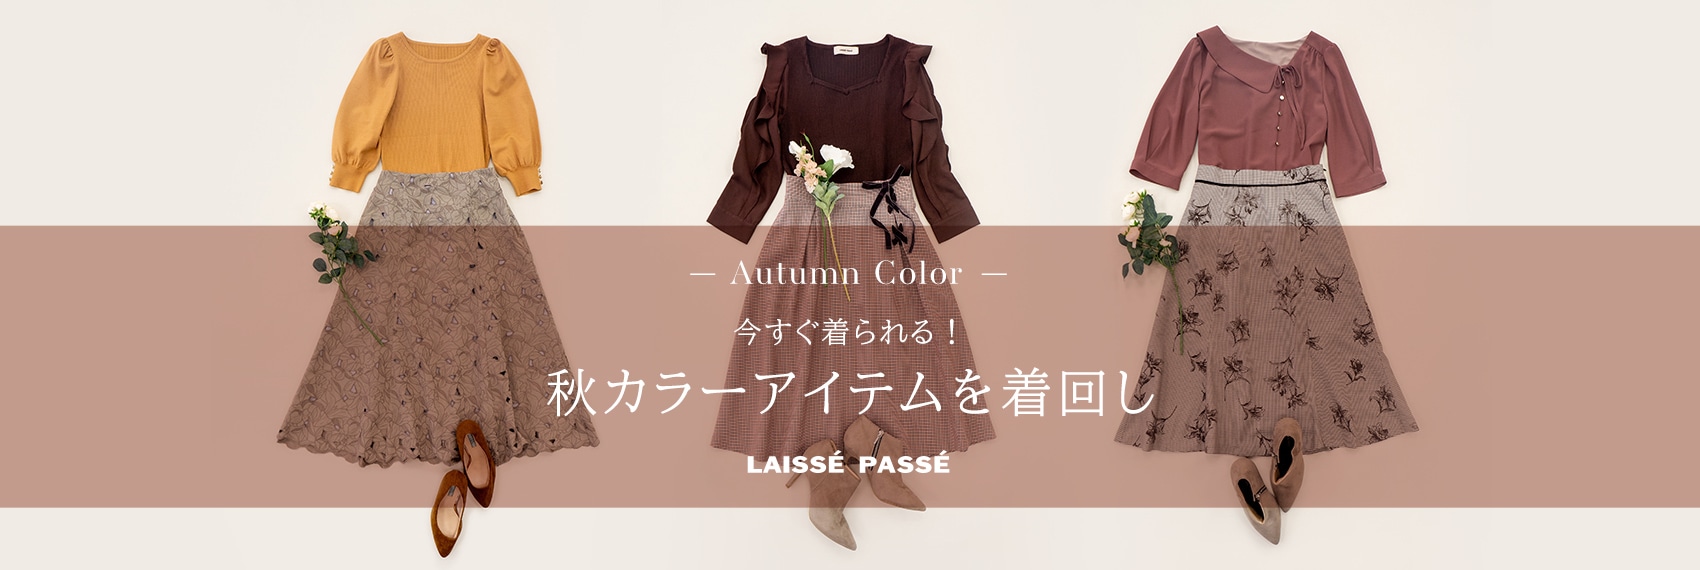 Autumn＆Winter Collection ツイードアイテム着回し9Style